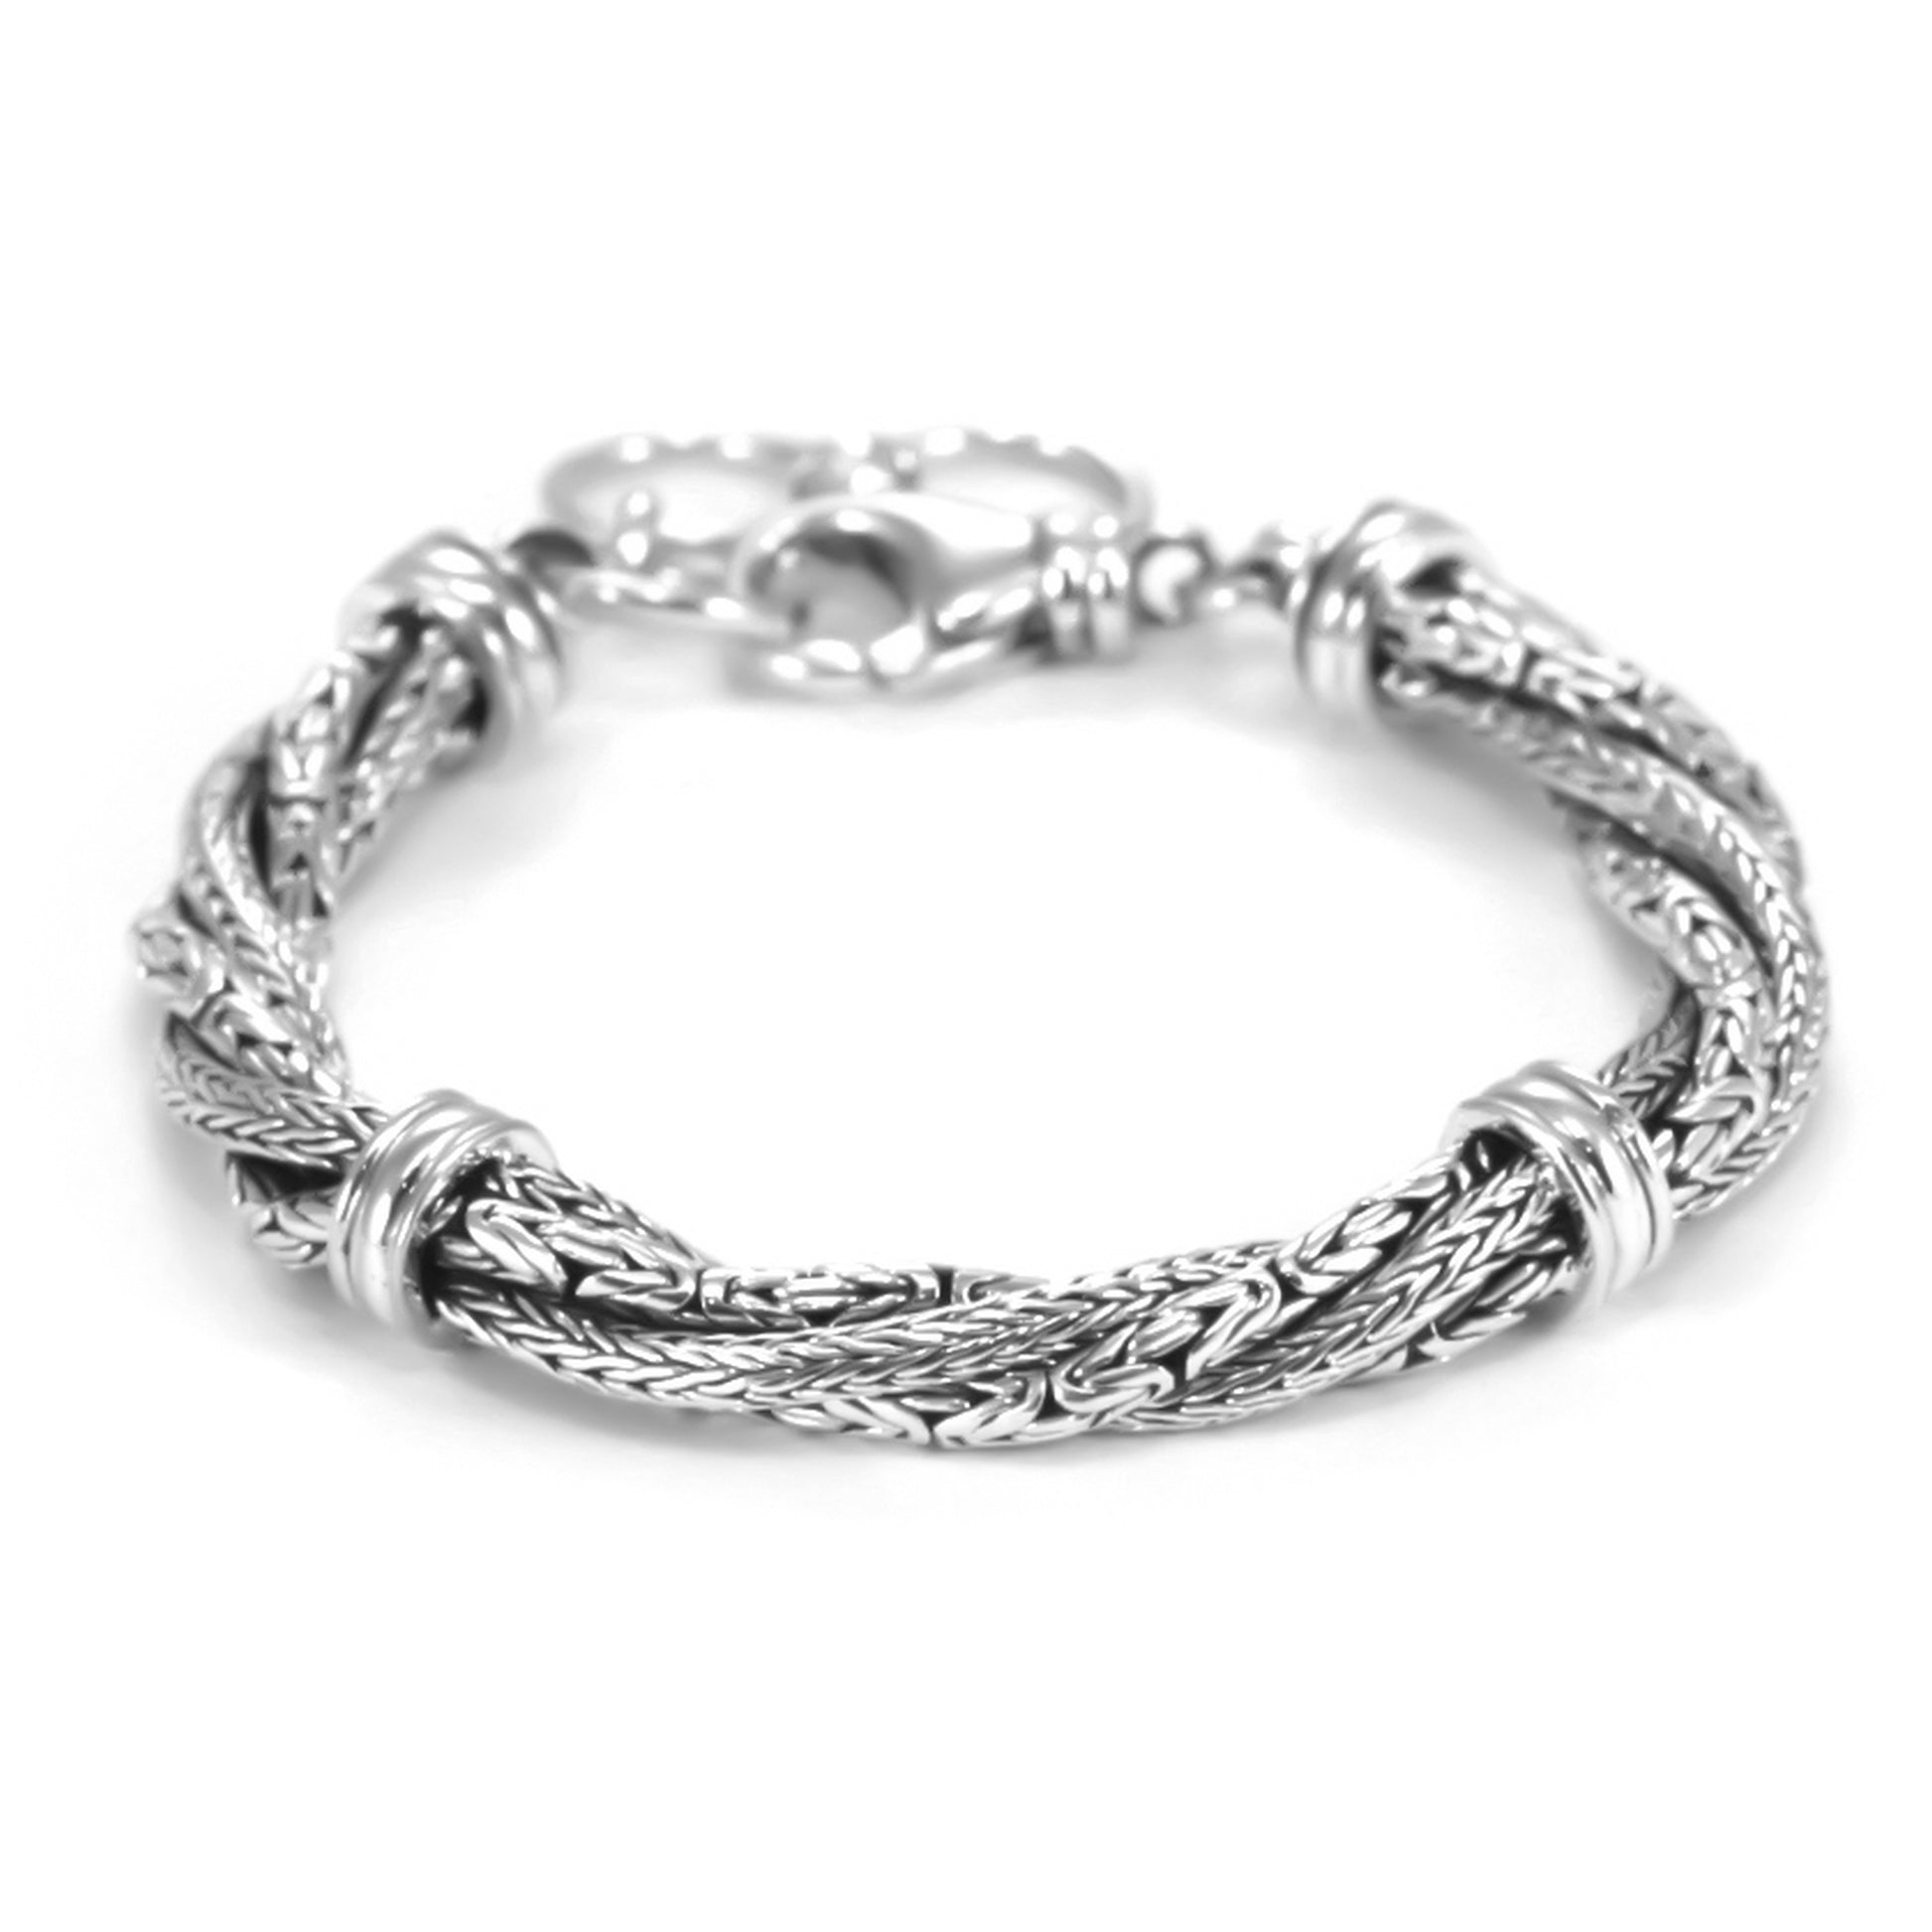 Silver bracelet made of twisted byzantine and herringbone chains.